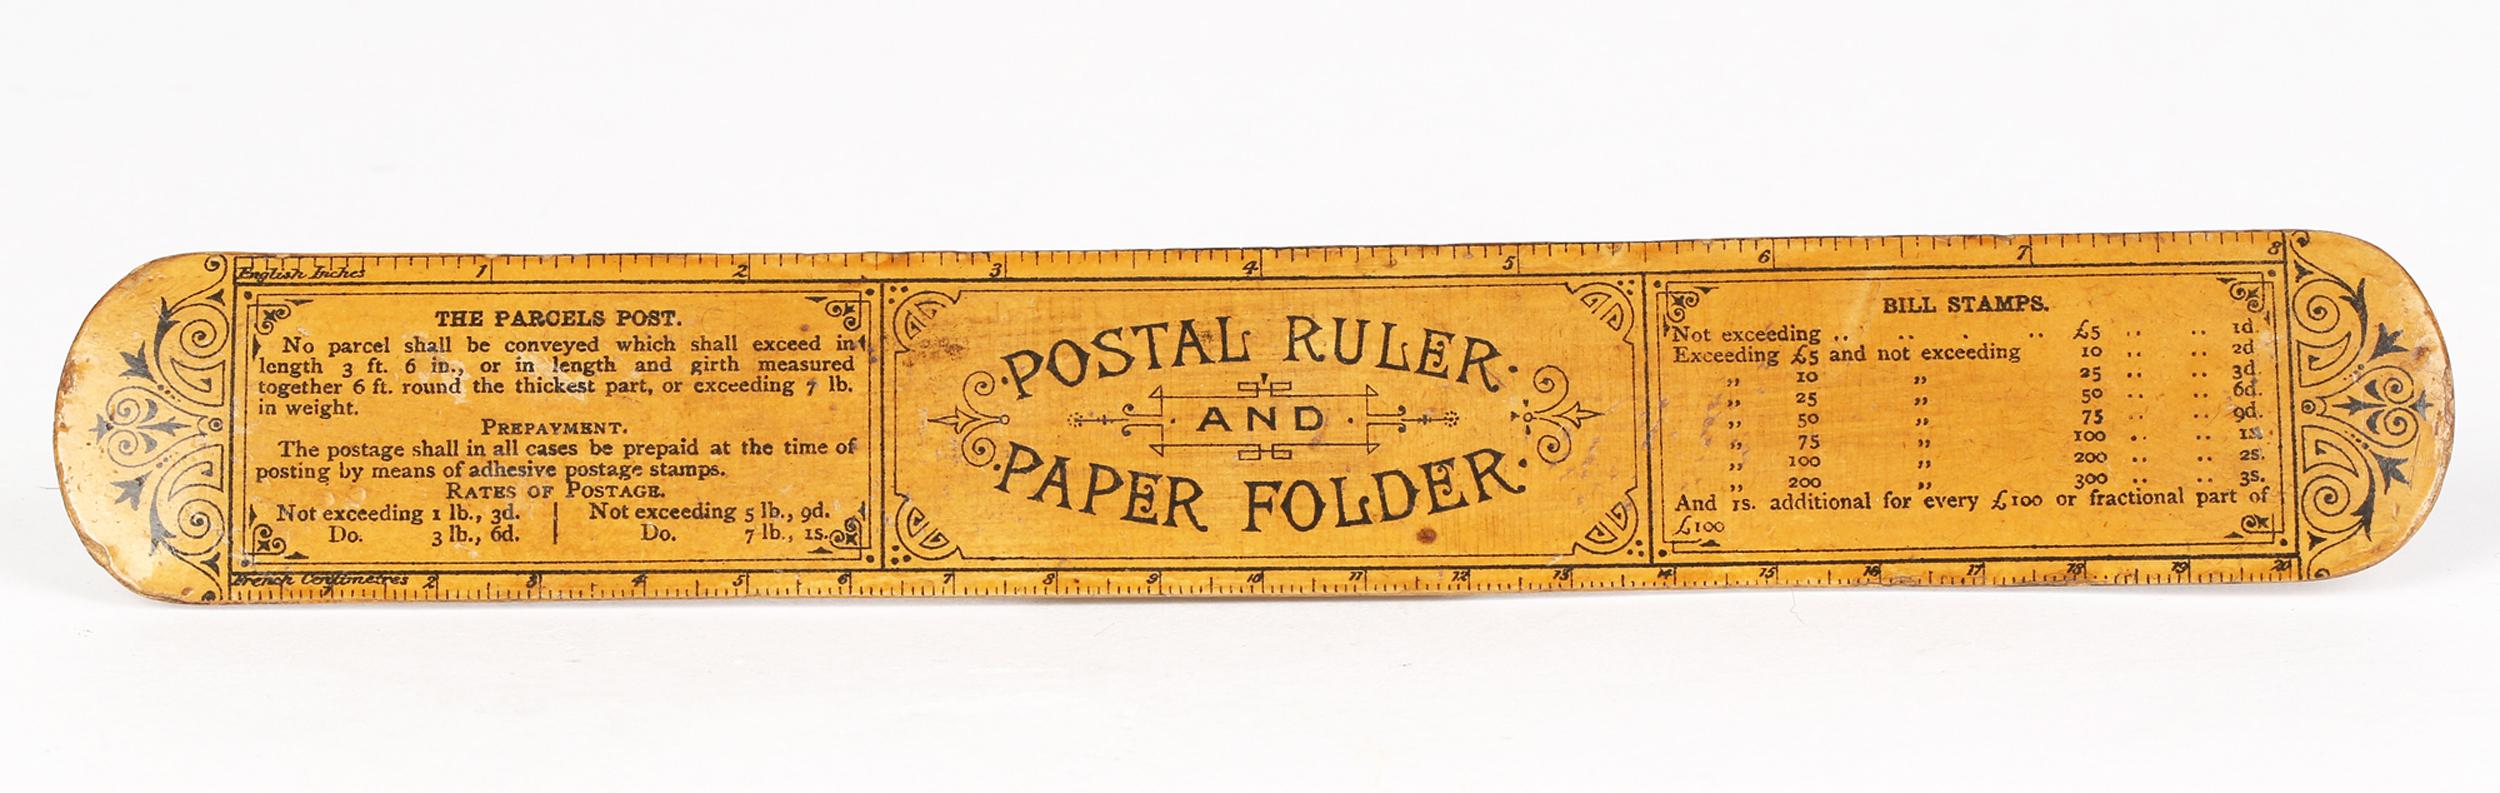 Mauchline Wooden Postal Ruler and Paper Folder with Beach & Cliffs, Cromer For Sale 5